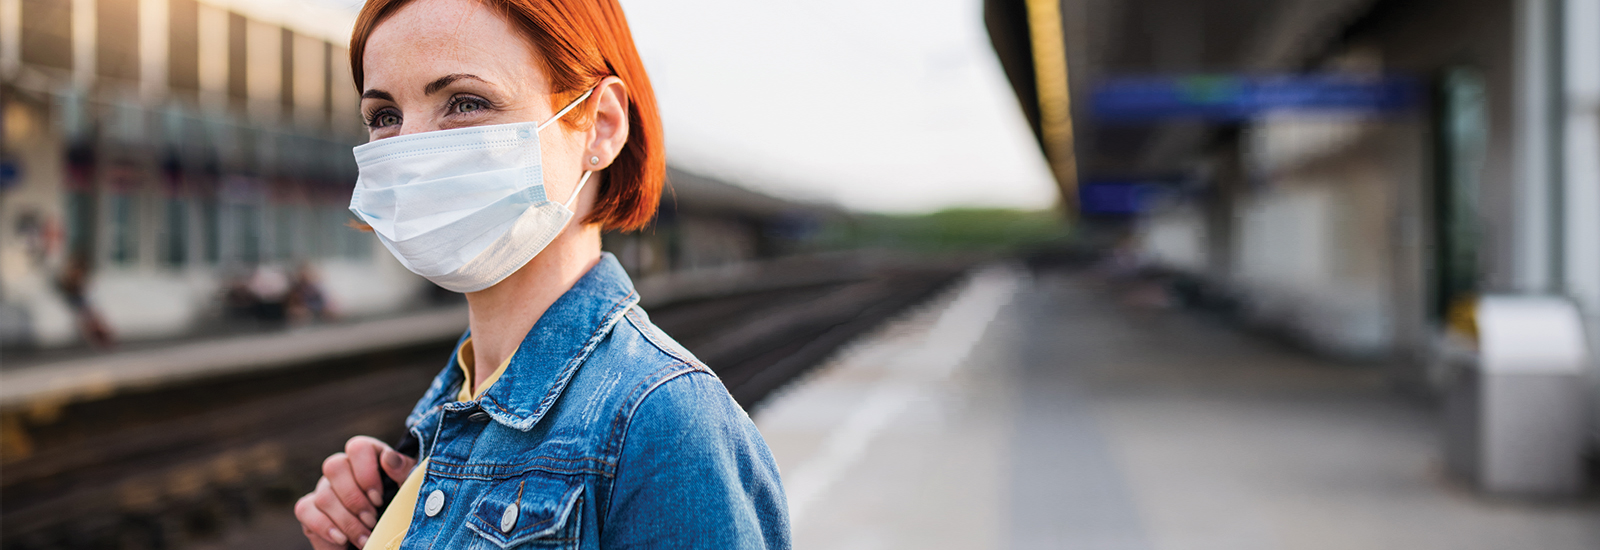 Woman waiting for a train and wearing a face mask to protect herself and others